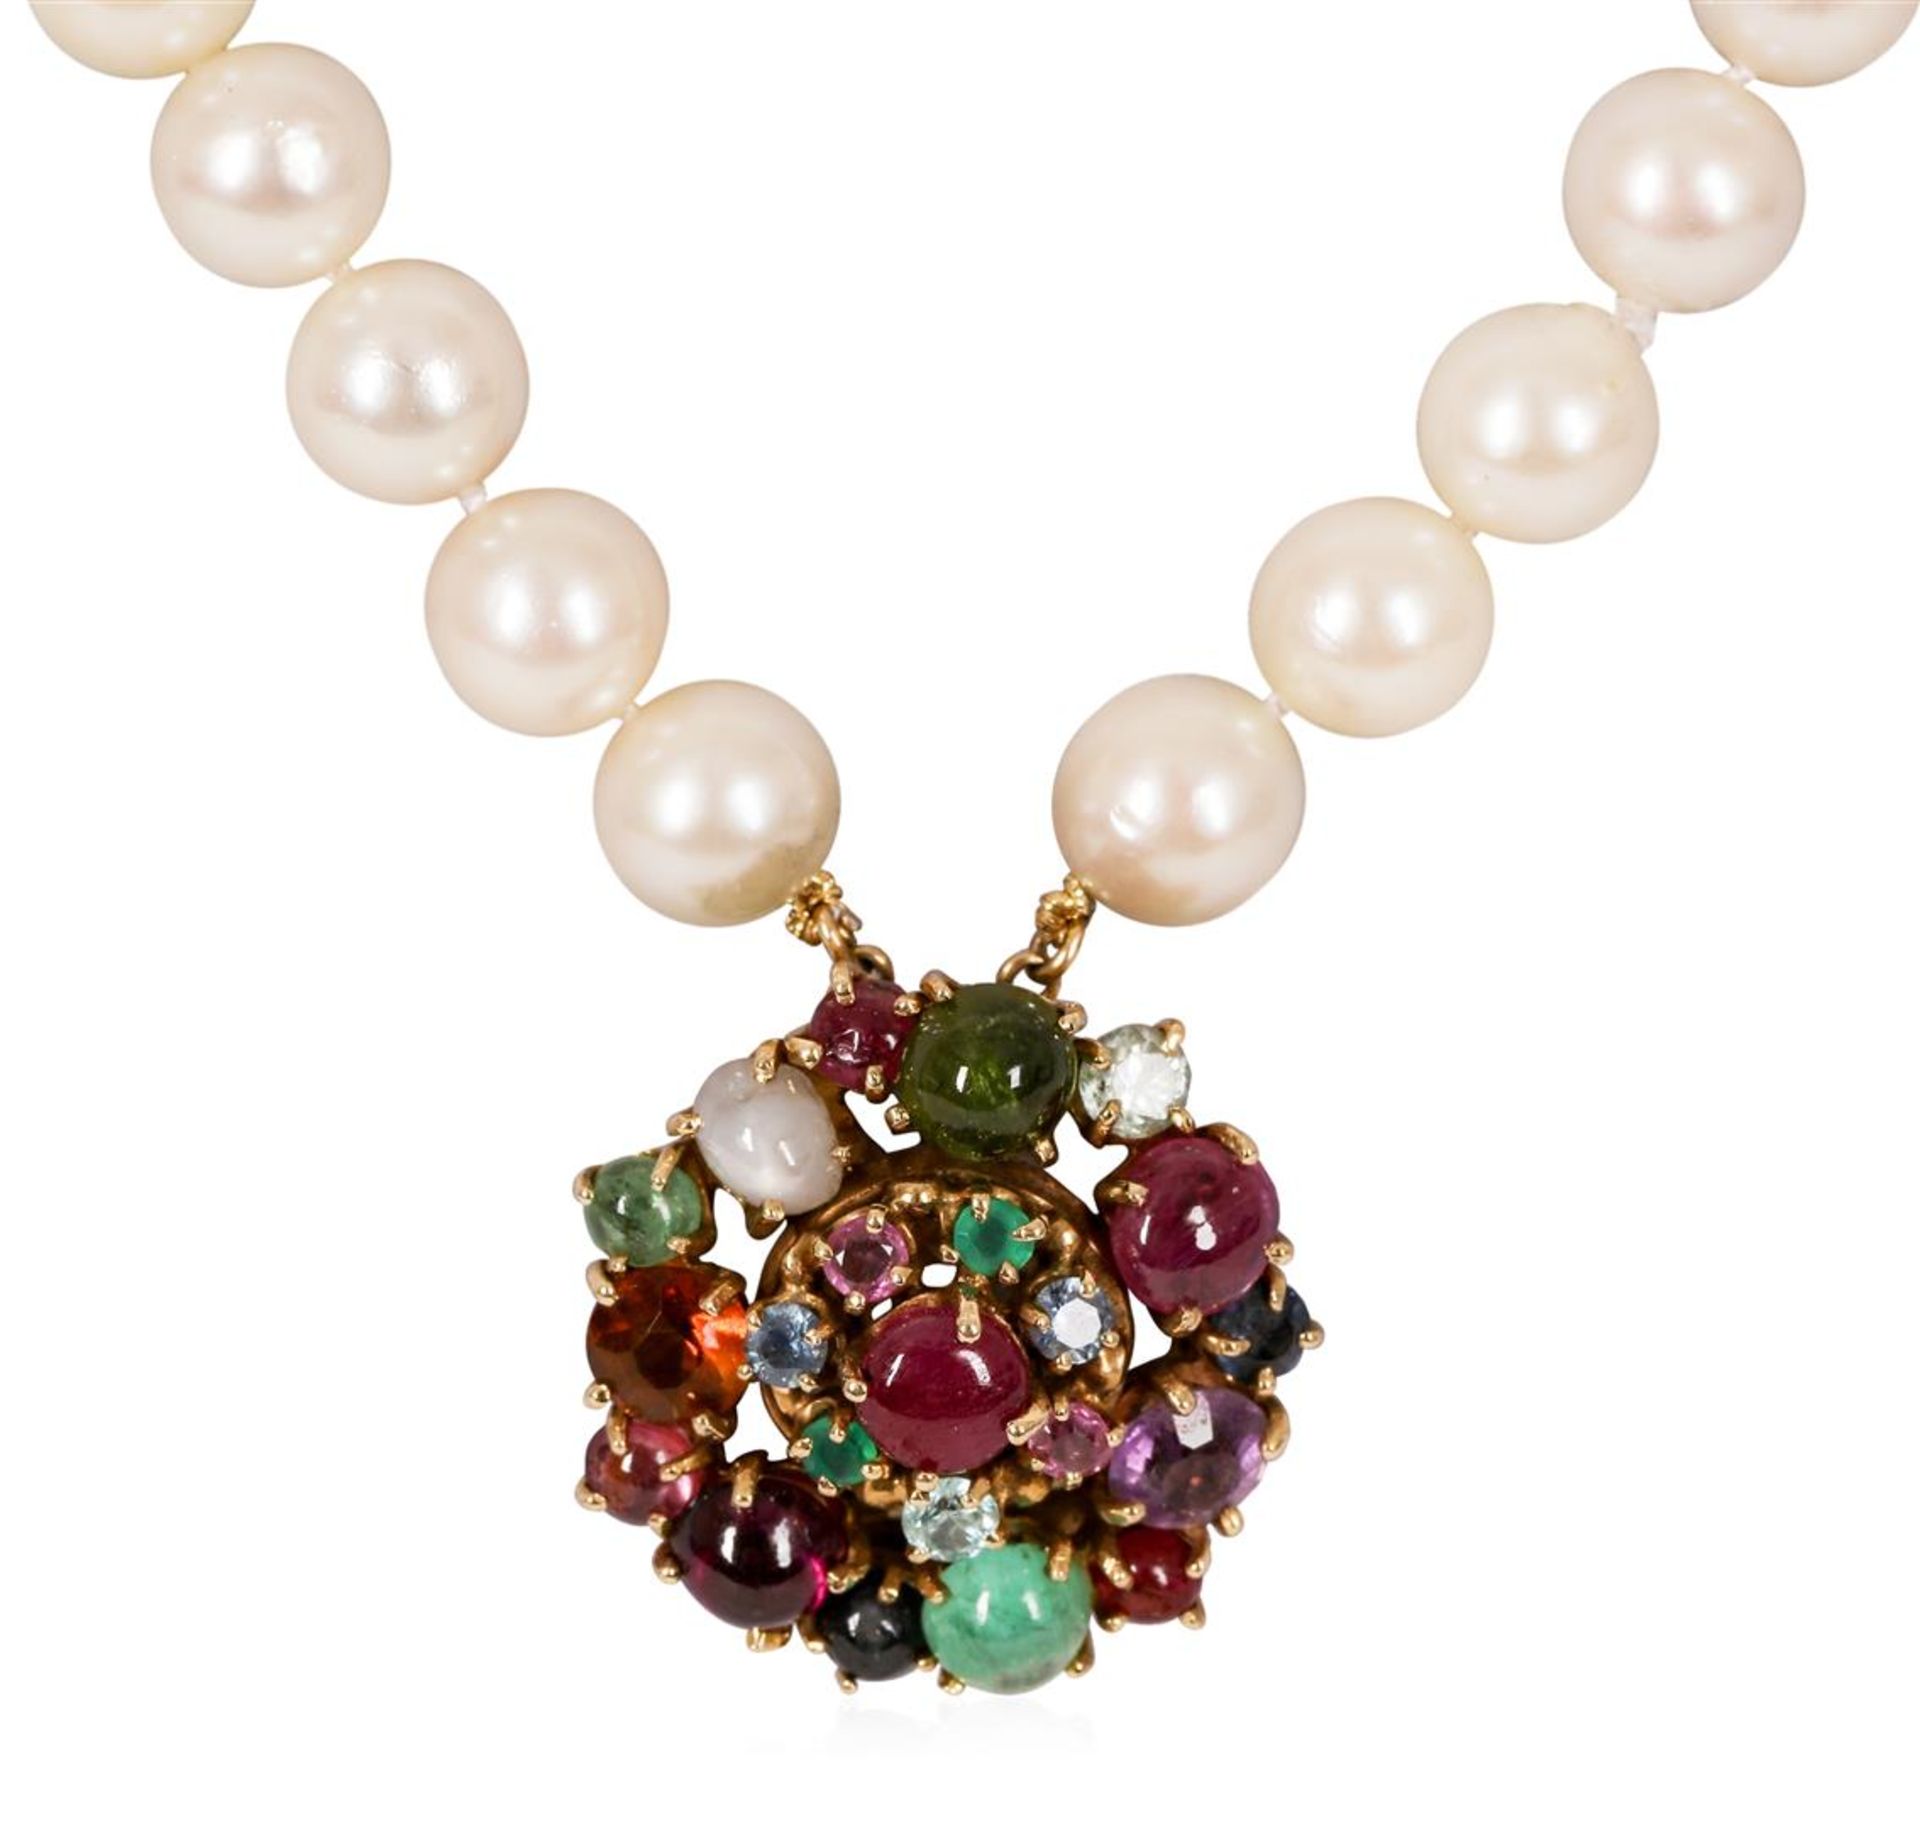 Double Strand Pearl Choker Necklace with 14KT Yellow Gold Multi-Color Stone Clas - Image 3 of 4